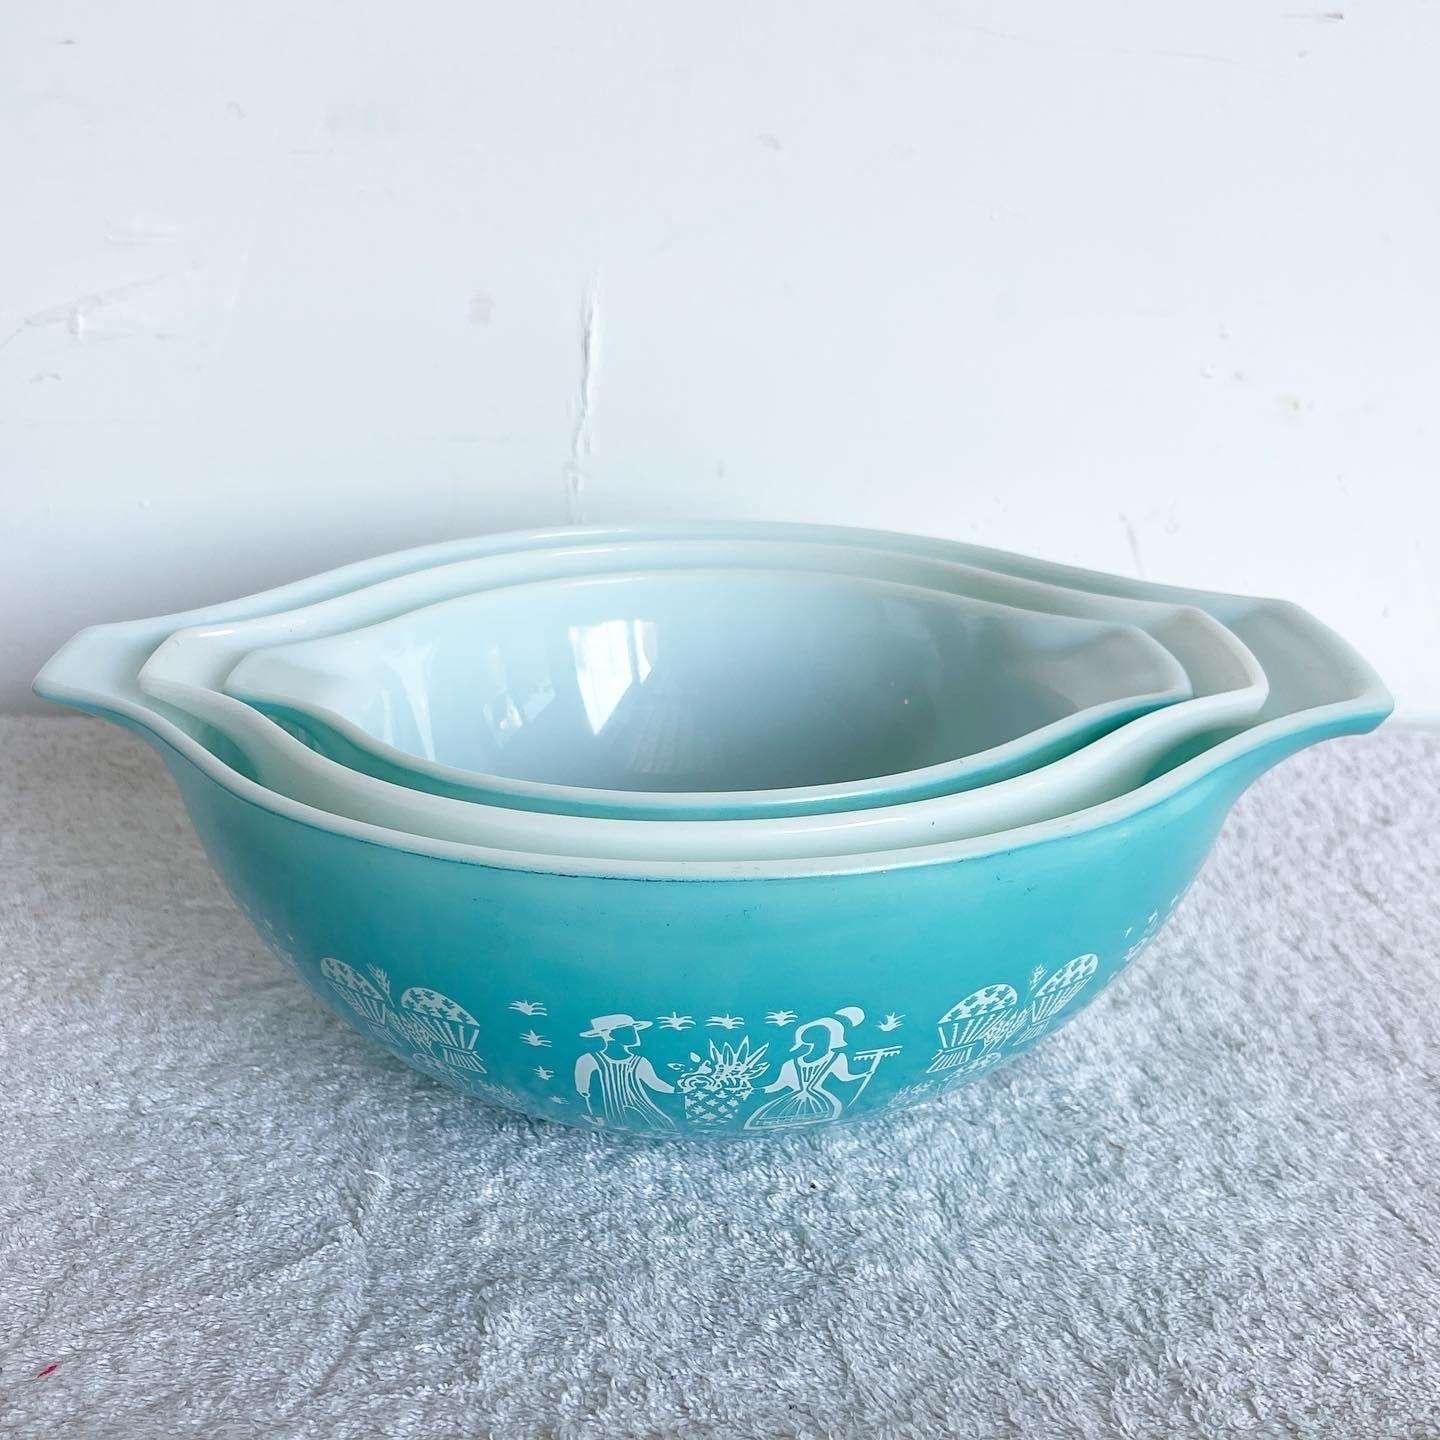 American Vintage Butterprint Bowls by Pyrex - Set of 3 For Sale